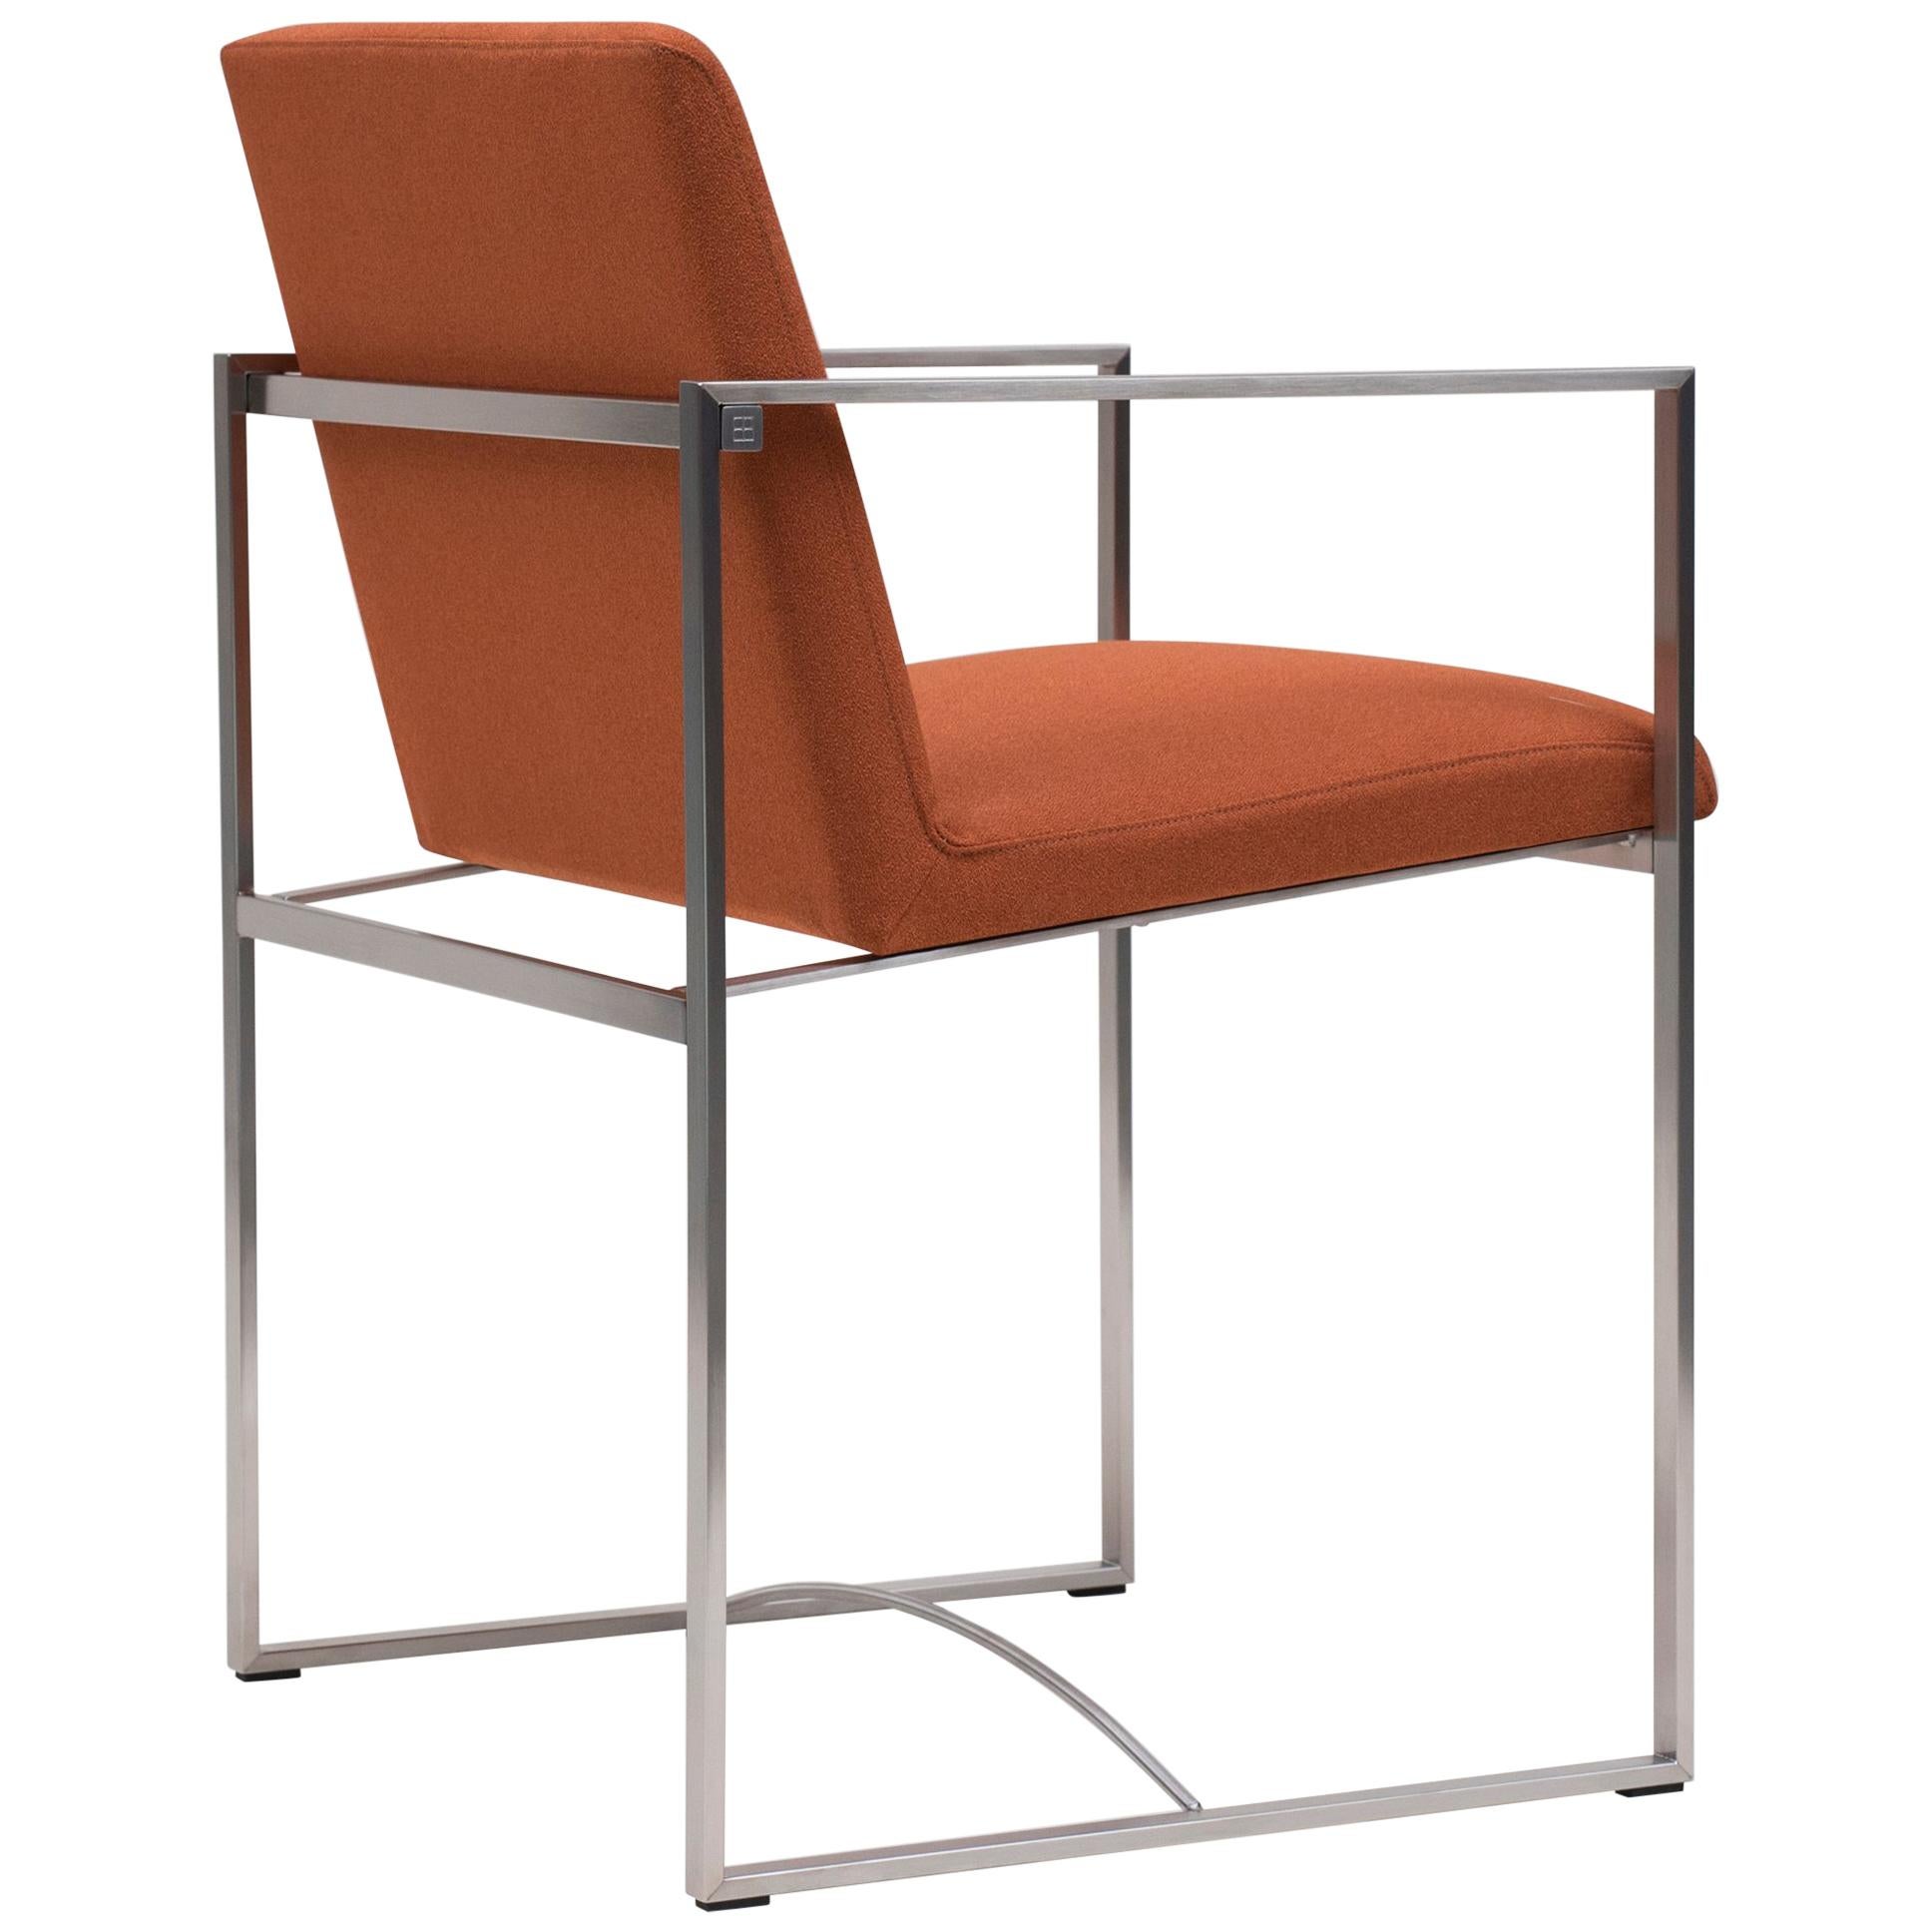 Armchair designed by Peter Ghyczy in 2018.
Manufactured by Ghyczy (Netherlands)

Material and color:
Frame stainless steel matt
Cast part aluminium matt
Fabric V/12 (Q2)
No Piping

Dimensions
L 52 x W 50 x H 47

Production delay: 
8